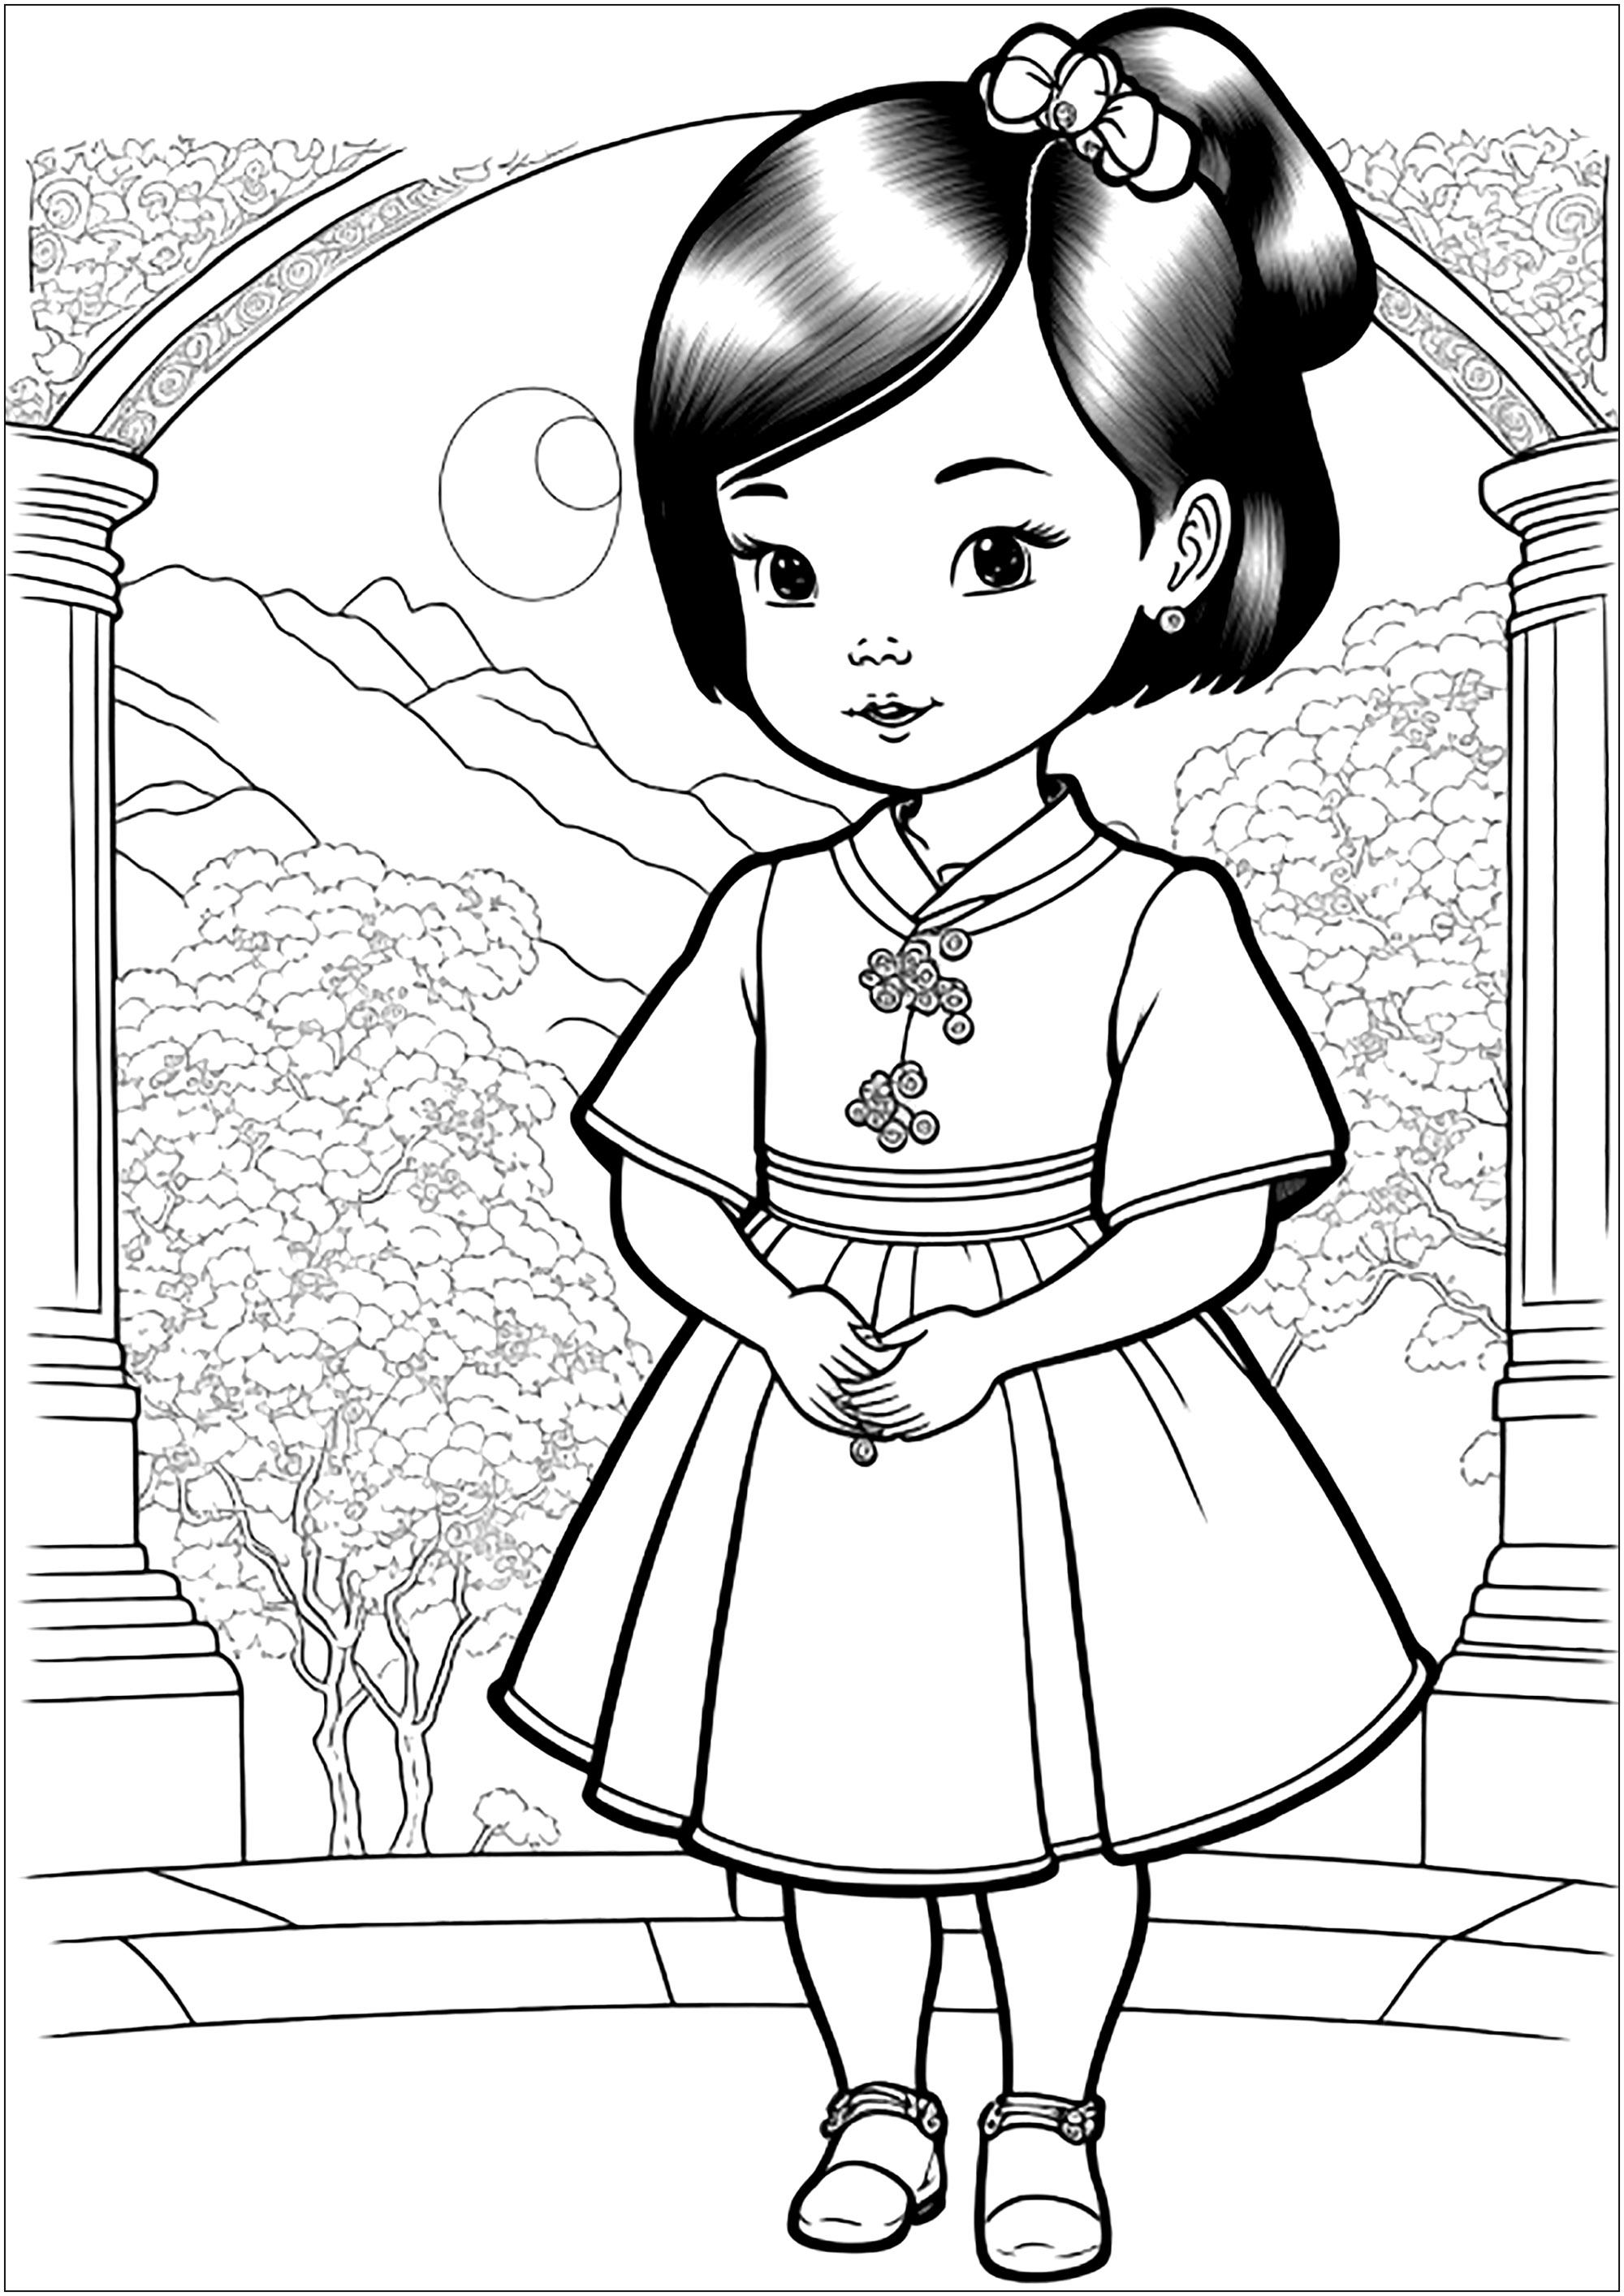 Chinese girl to color. Also color the pretty temple and the landscape in the background